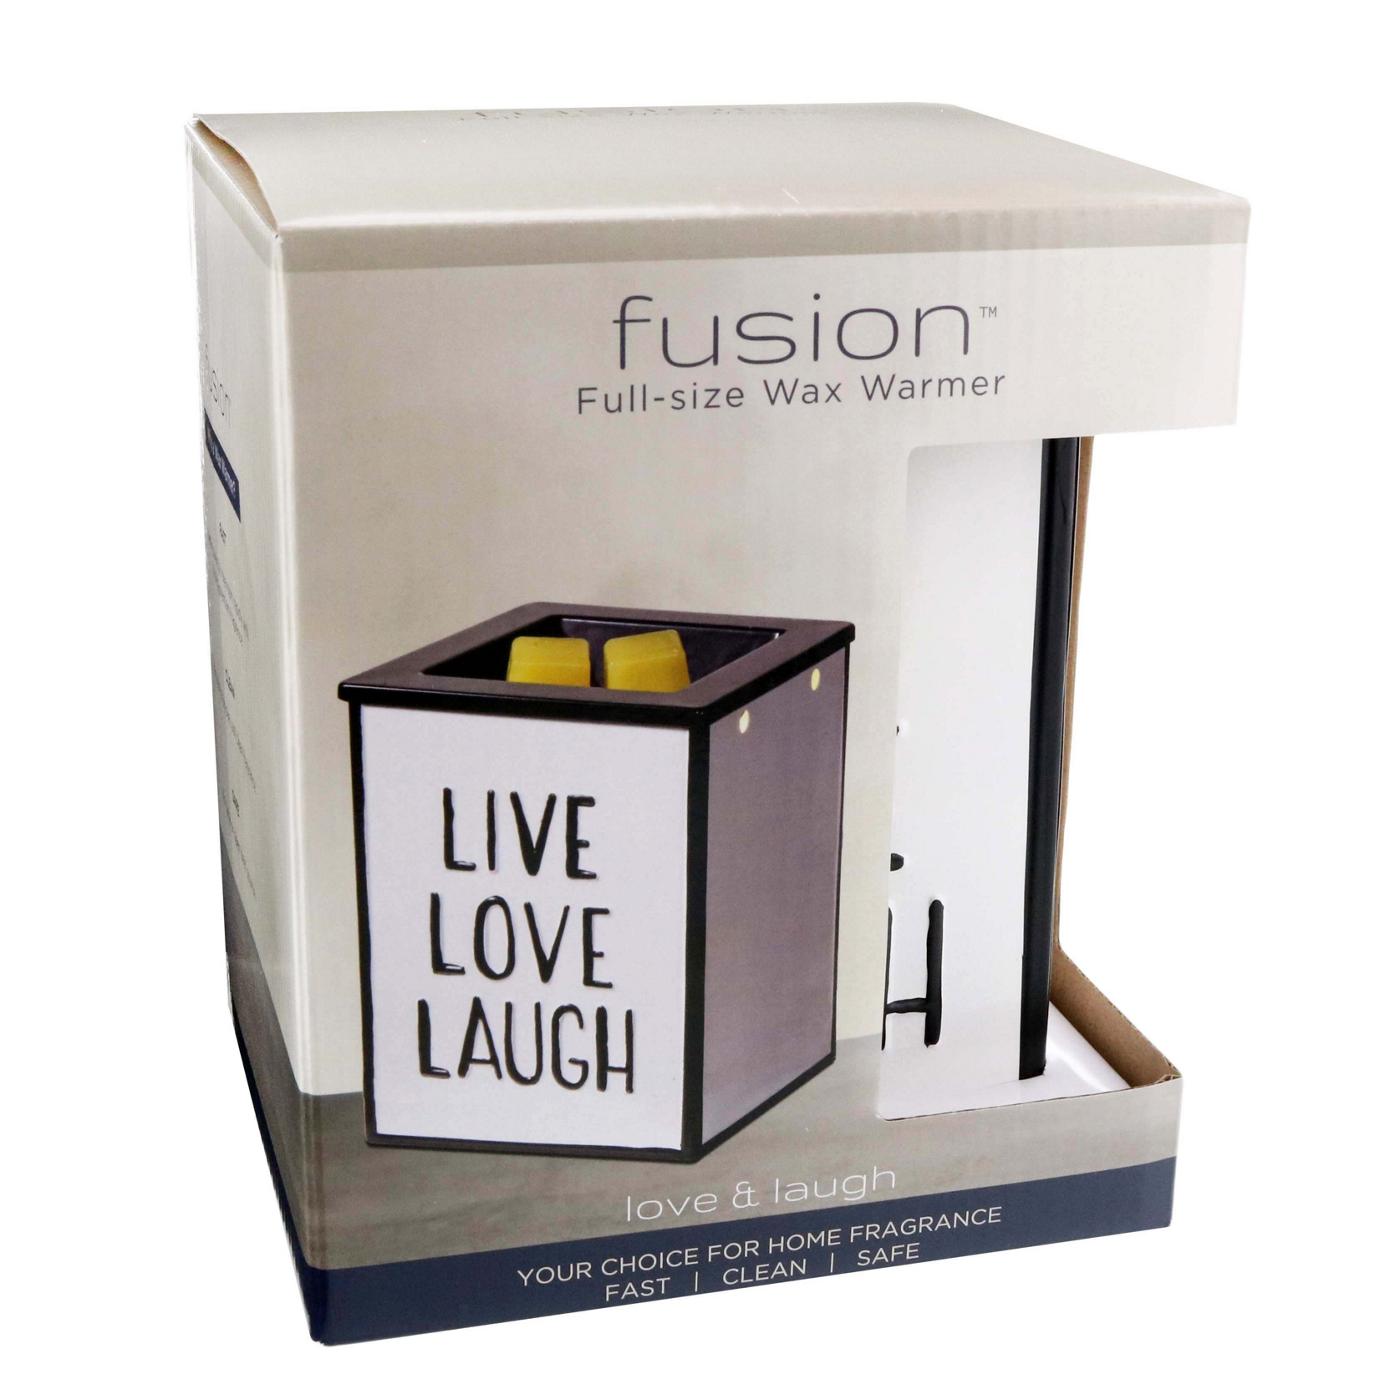 Fusion Love & Laugh Full Size Wax Warmer; image 2 of 2